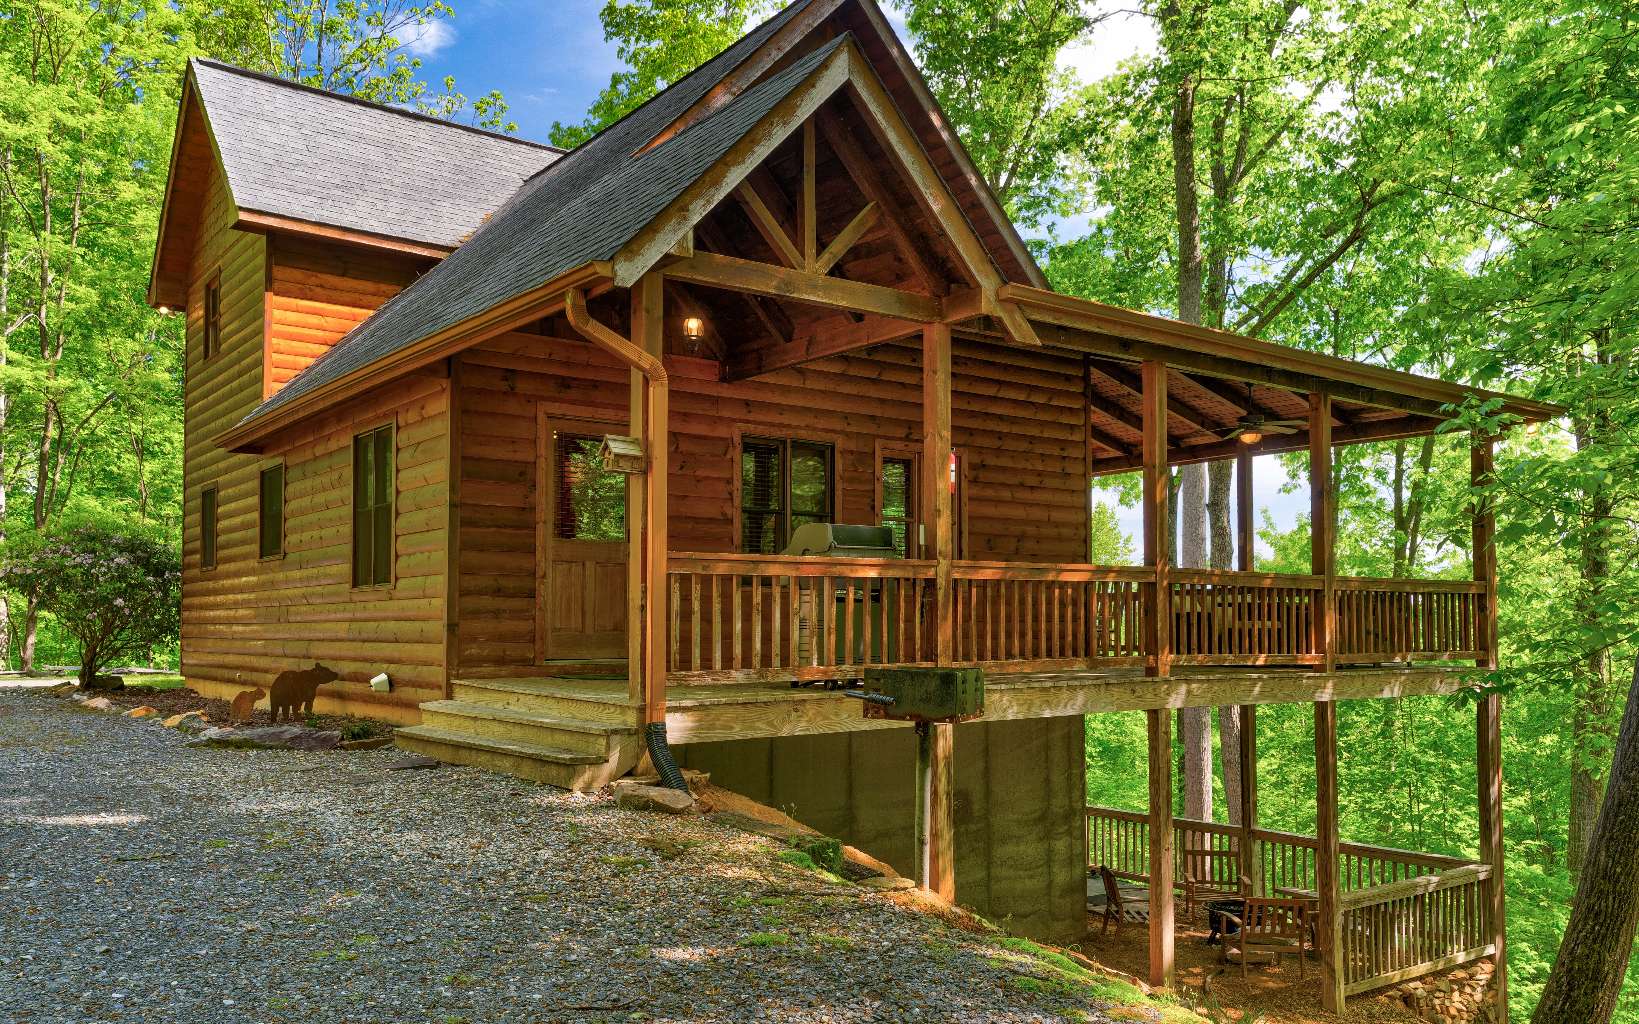 "Sweet Seclusion" can be yours!! Privacy and seclusion yet close to all outdoor amenities, shopping and dining of both Blue Ridge and Blairsville! Located just 20 min to both the Toccoa River or Lake Blue Ridge, this 3/3 gorgeous cabin not only offers privacy but with an open floor plan, spacious great room w/ soaring stacked stone fireplace, 2 masters including an upstairs master suite w/private balcony, custom live edge wood countertops, hardwood flooring, finished basement w/tiled flooring, laundry on main level, oversized deck to take in the mountain view and more, this one is sure to have you calling your favorite agent to book a showing today. Sold turn-key ready for you and your toothbrush!! If you are looking for an investment rental, full time in the mountains or charming second home, this one is ready for what works best for you!! Schedule your showing today!!